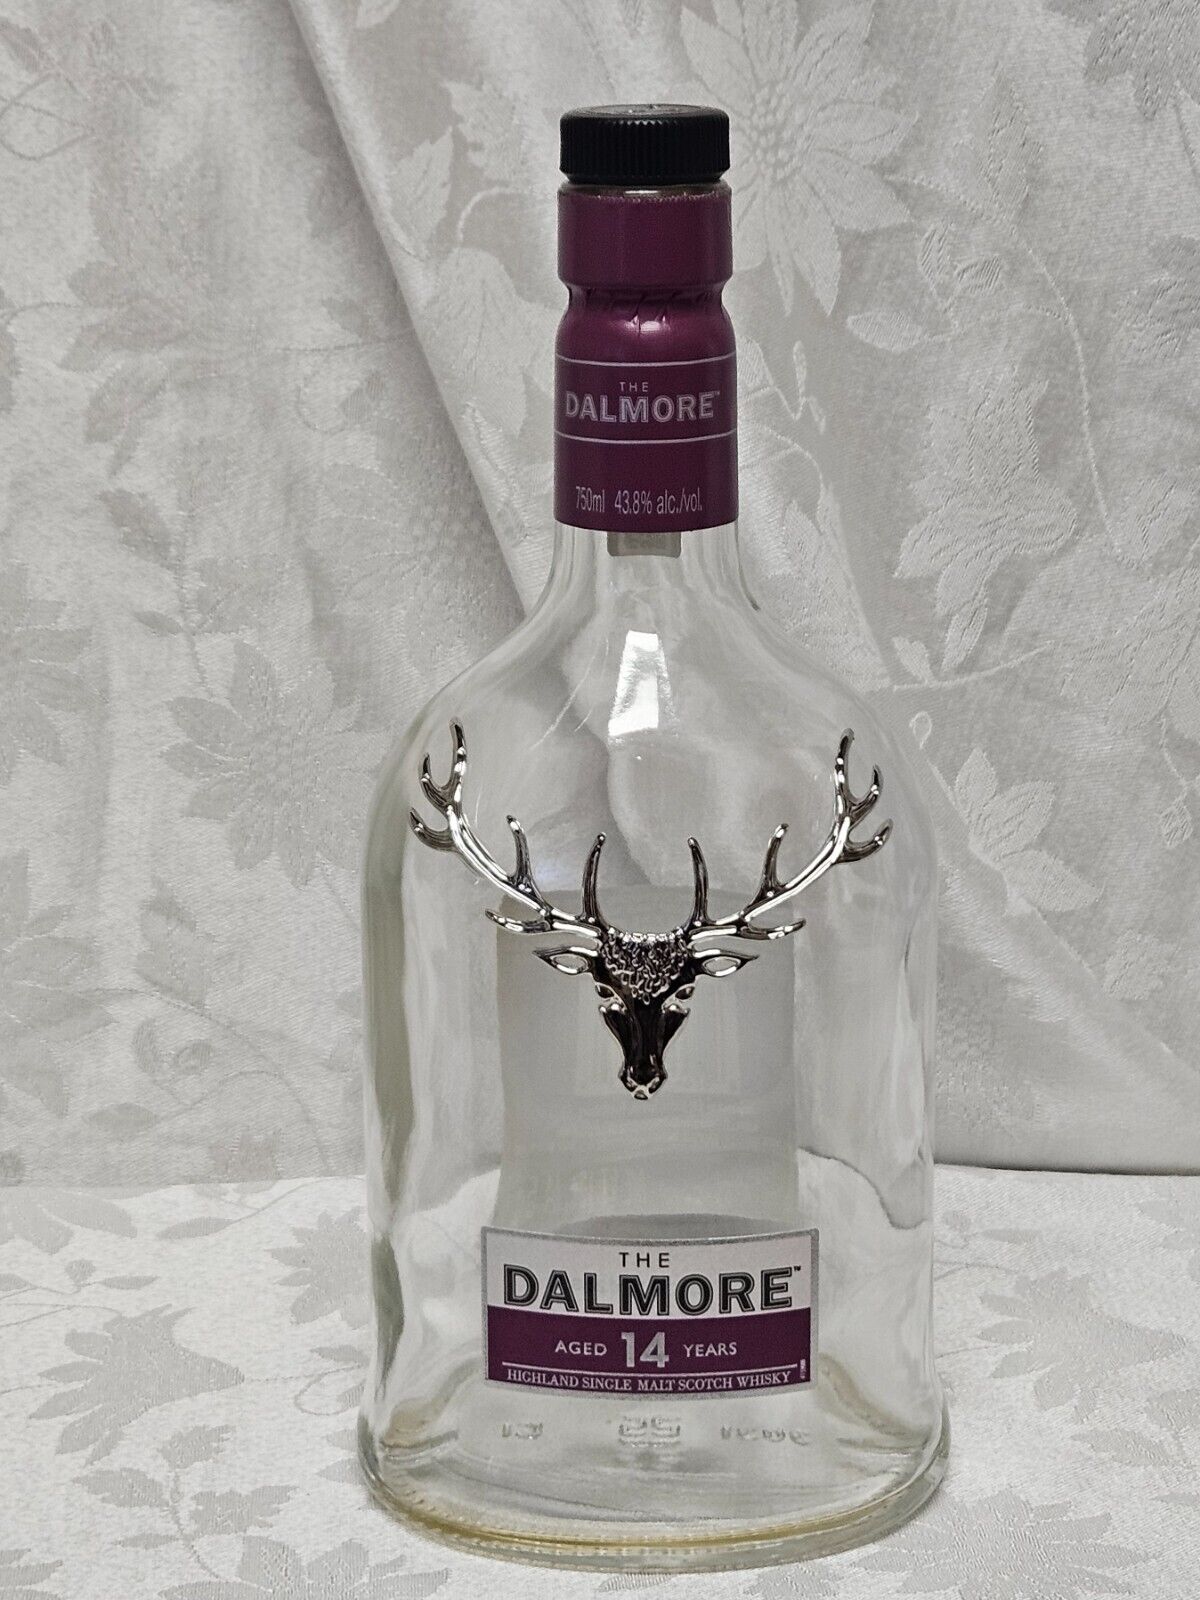 Dalmore 14 Year Old Scotch Empty Bottle.